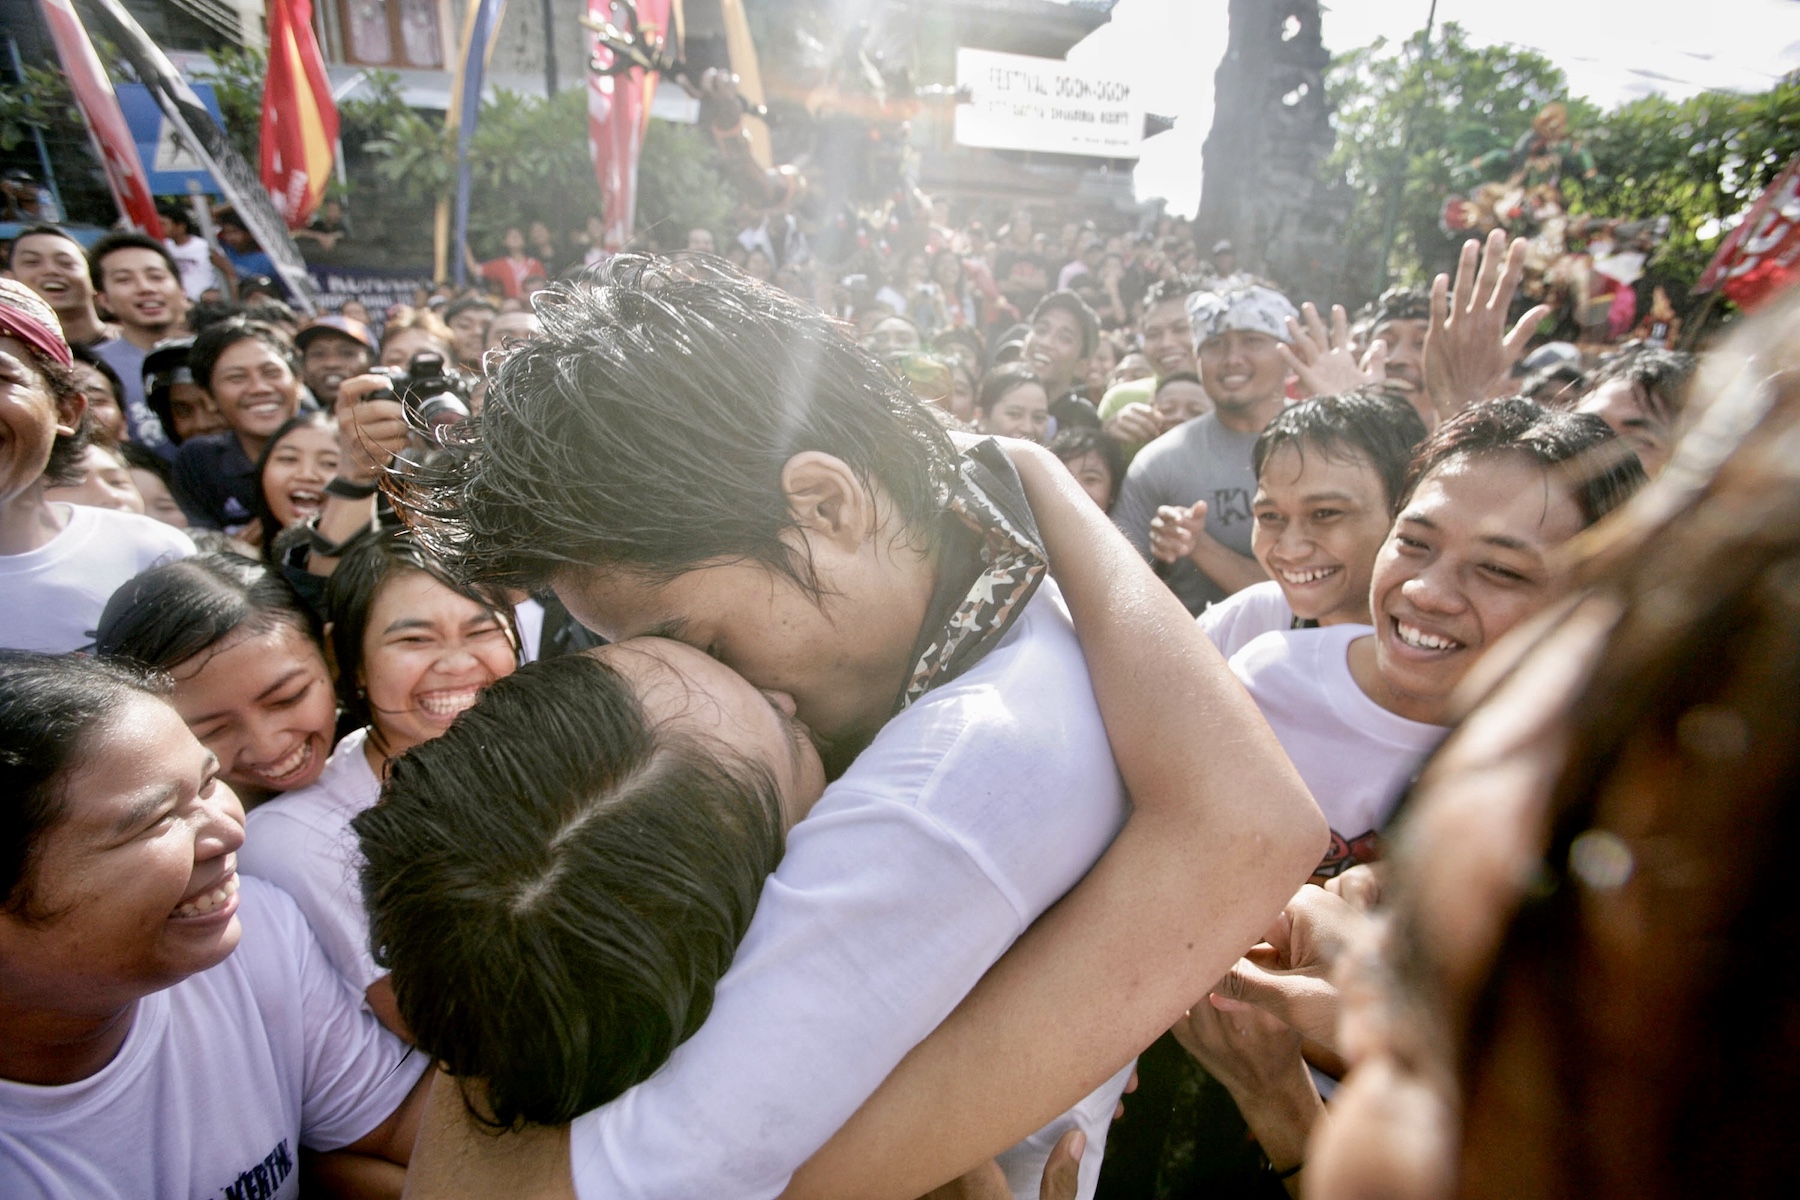 Indonesia Has Passed A New Law Banning Sex Outside Of Marriage And Unauthorized Protests